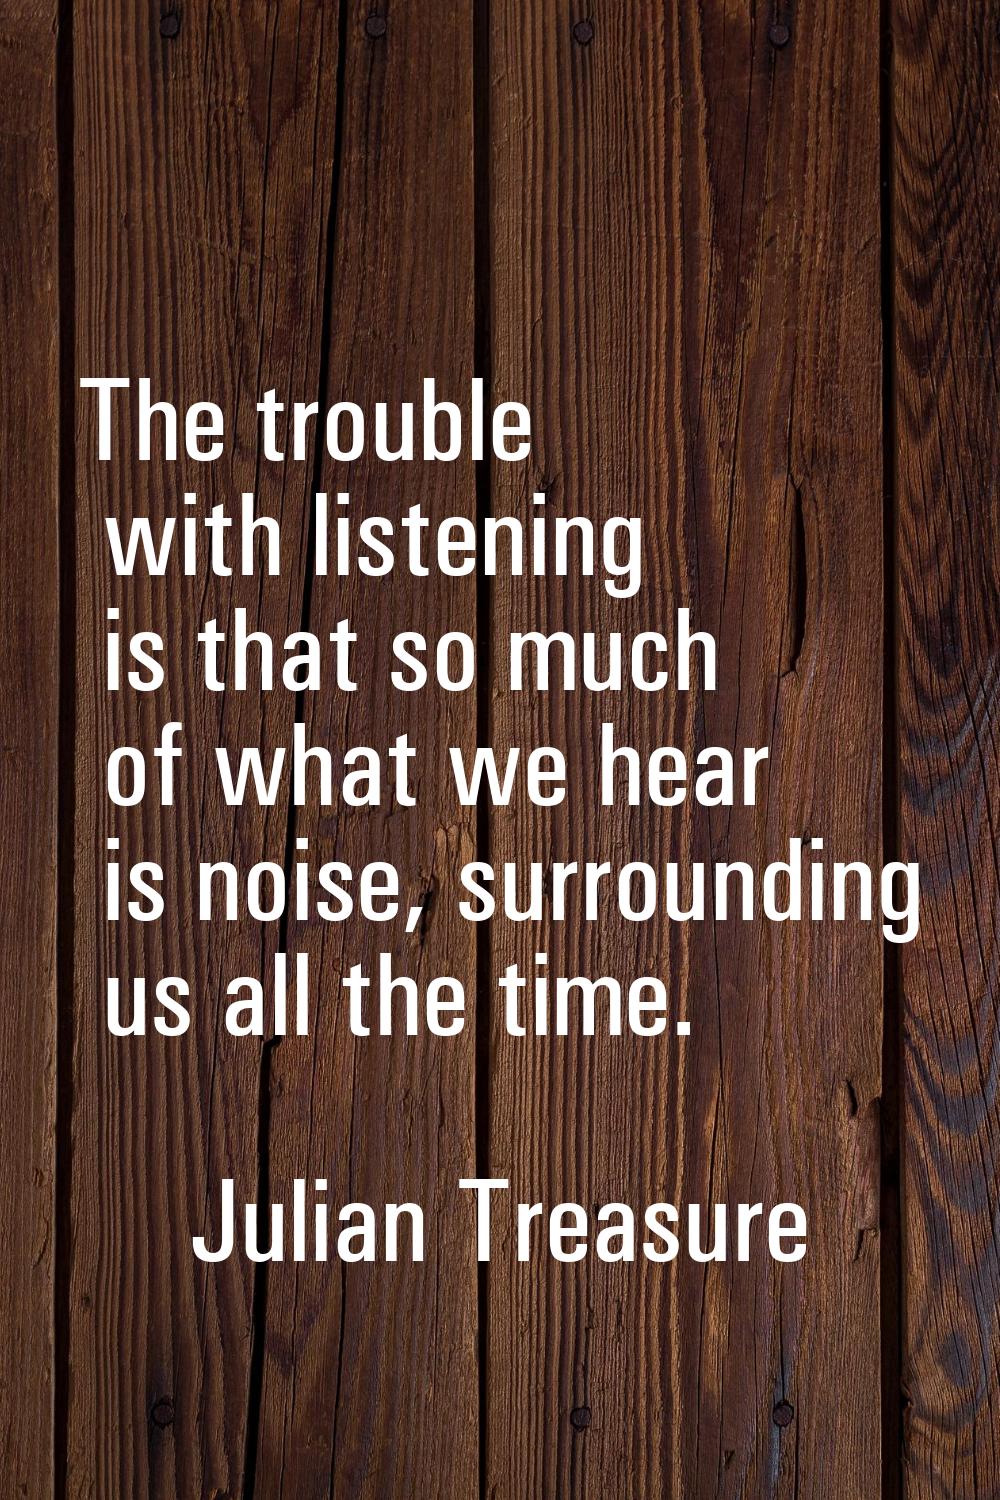 The trouble with listening is that so much of what we hear is noise, surrounding us all the time.